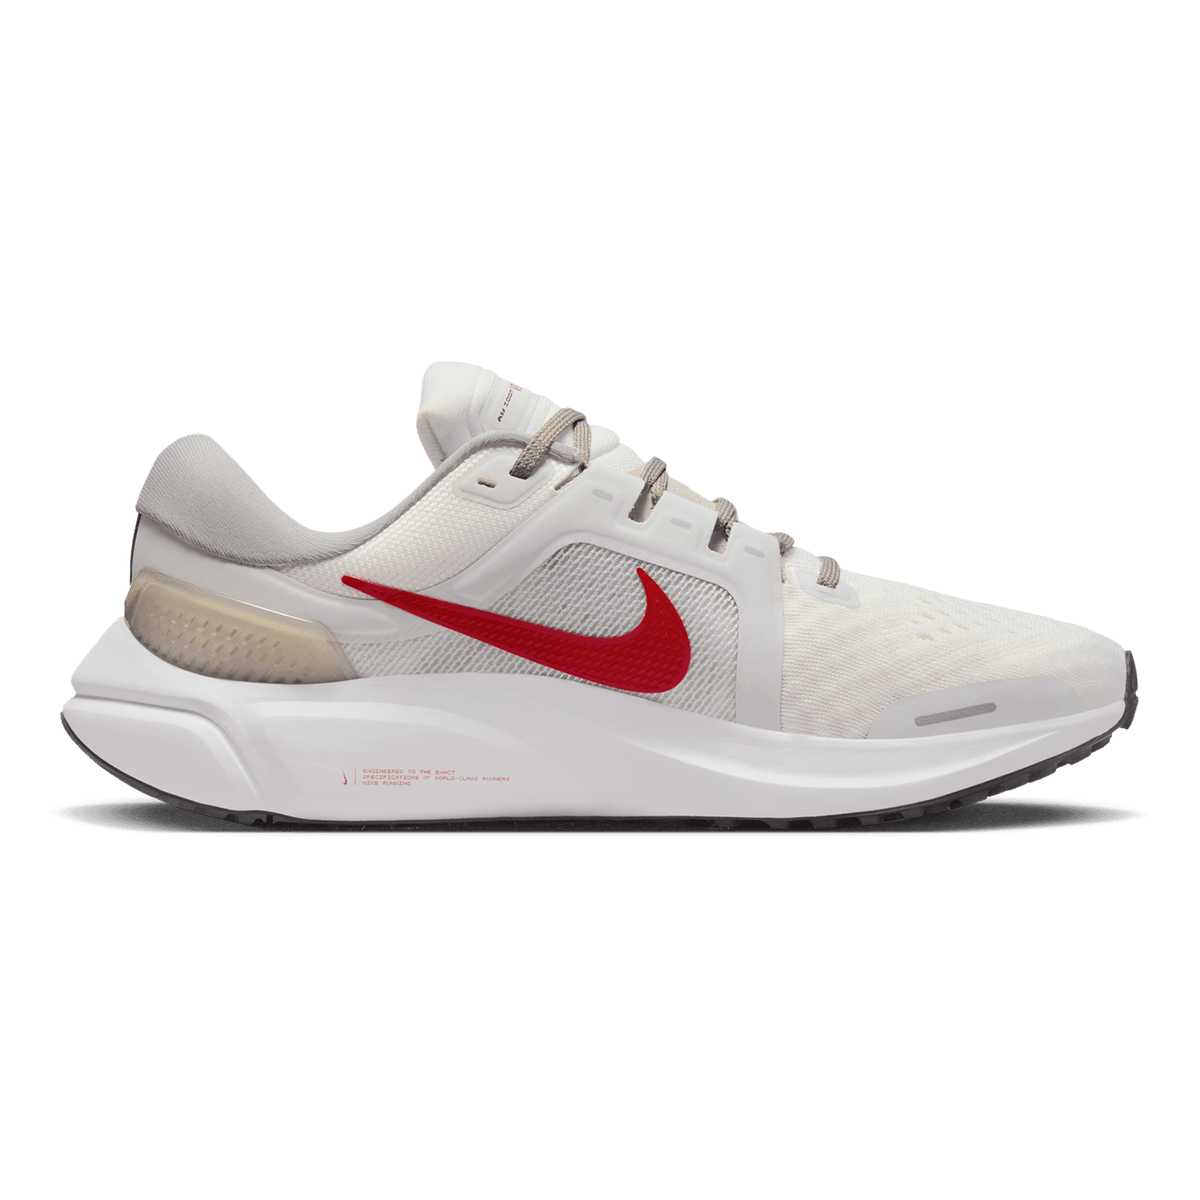 Nike Air Zoom Vomero 16, , large image number null